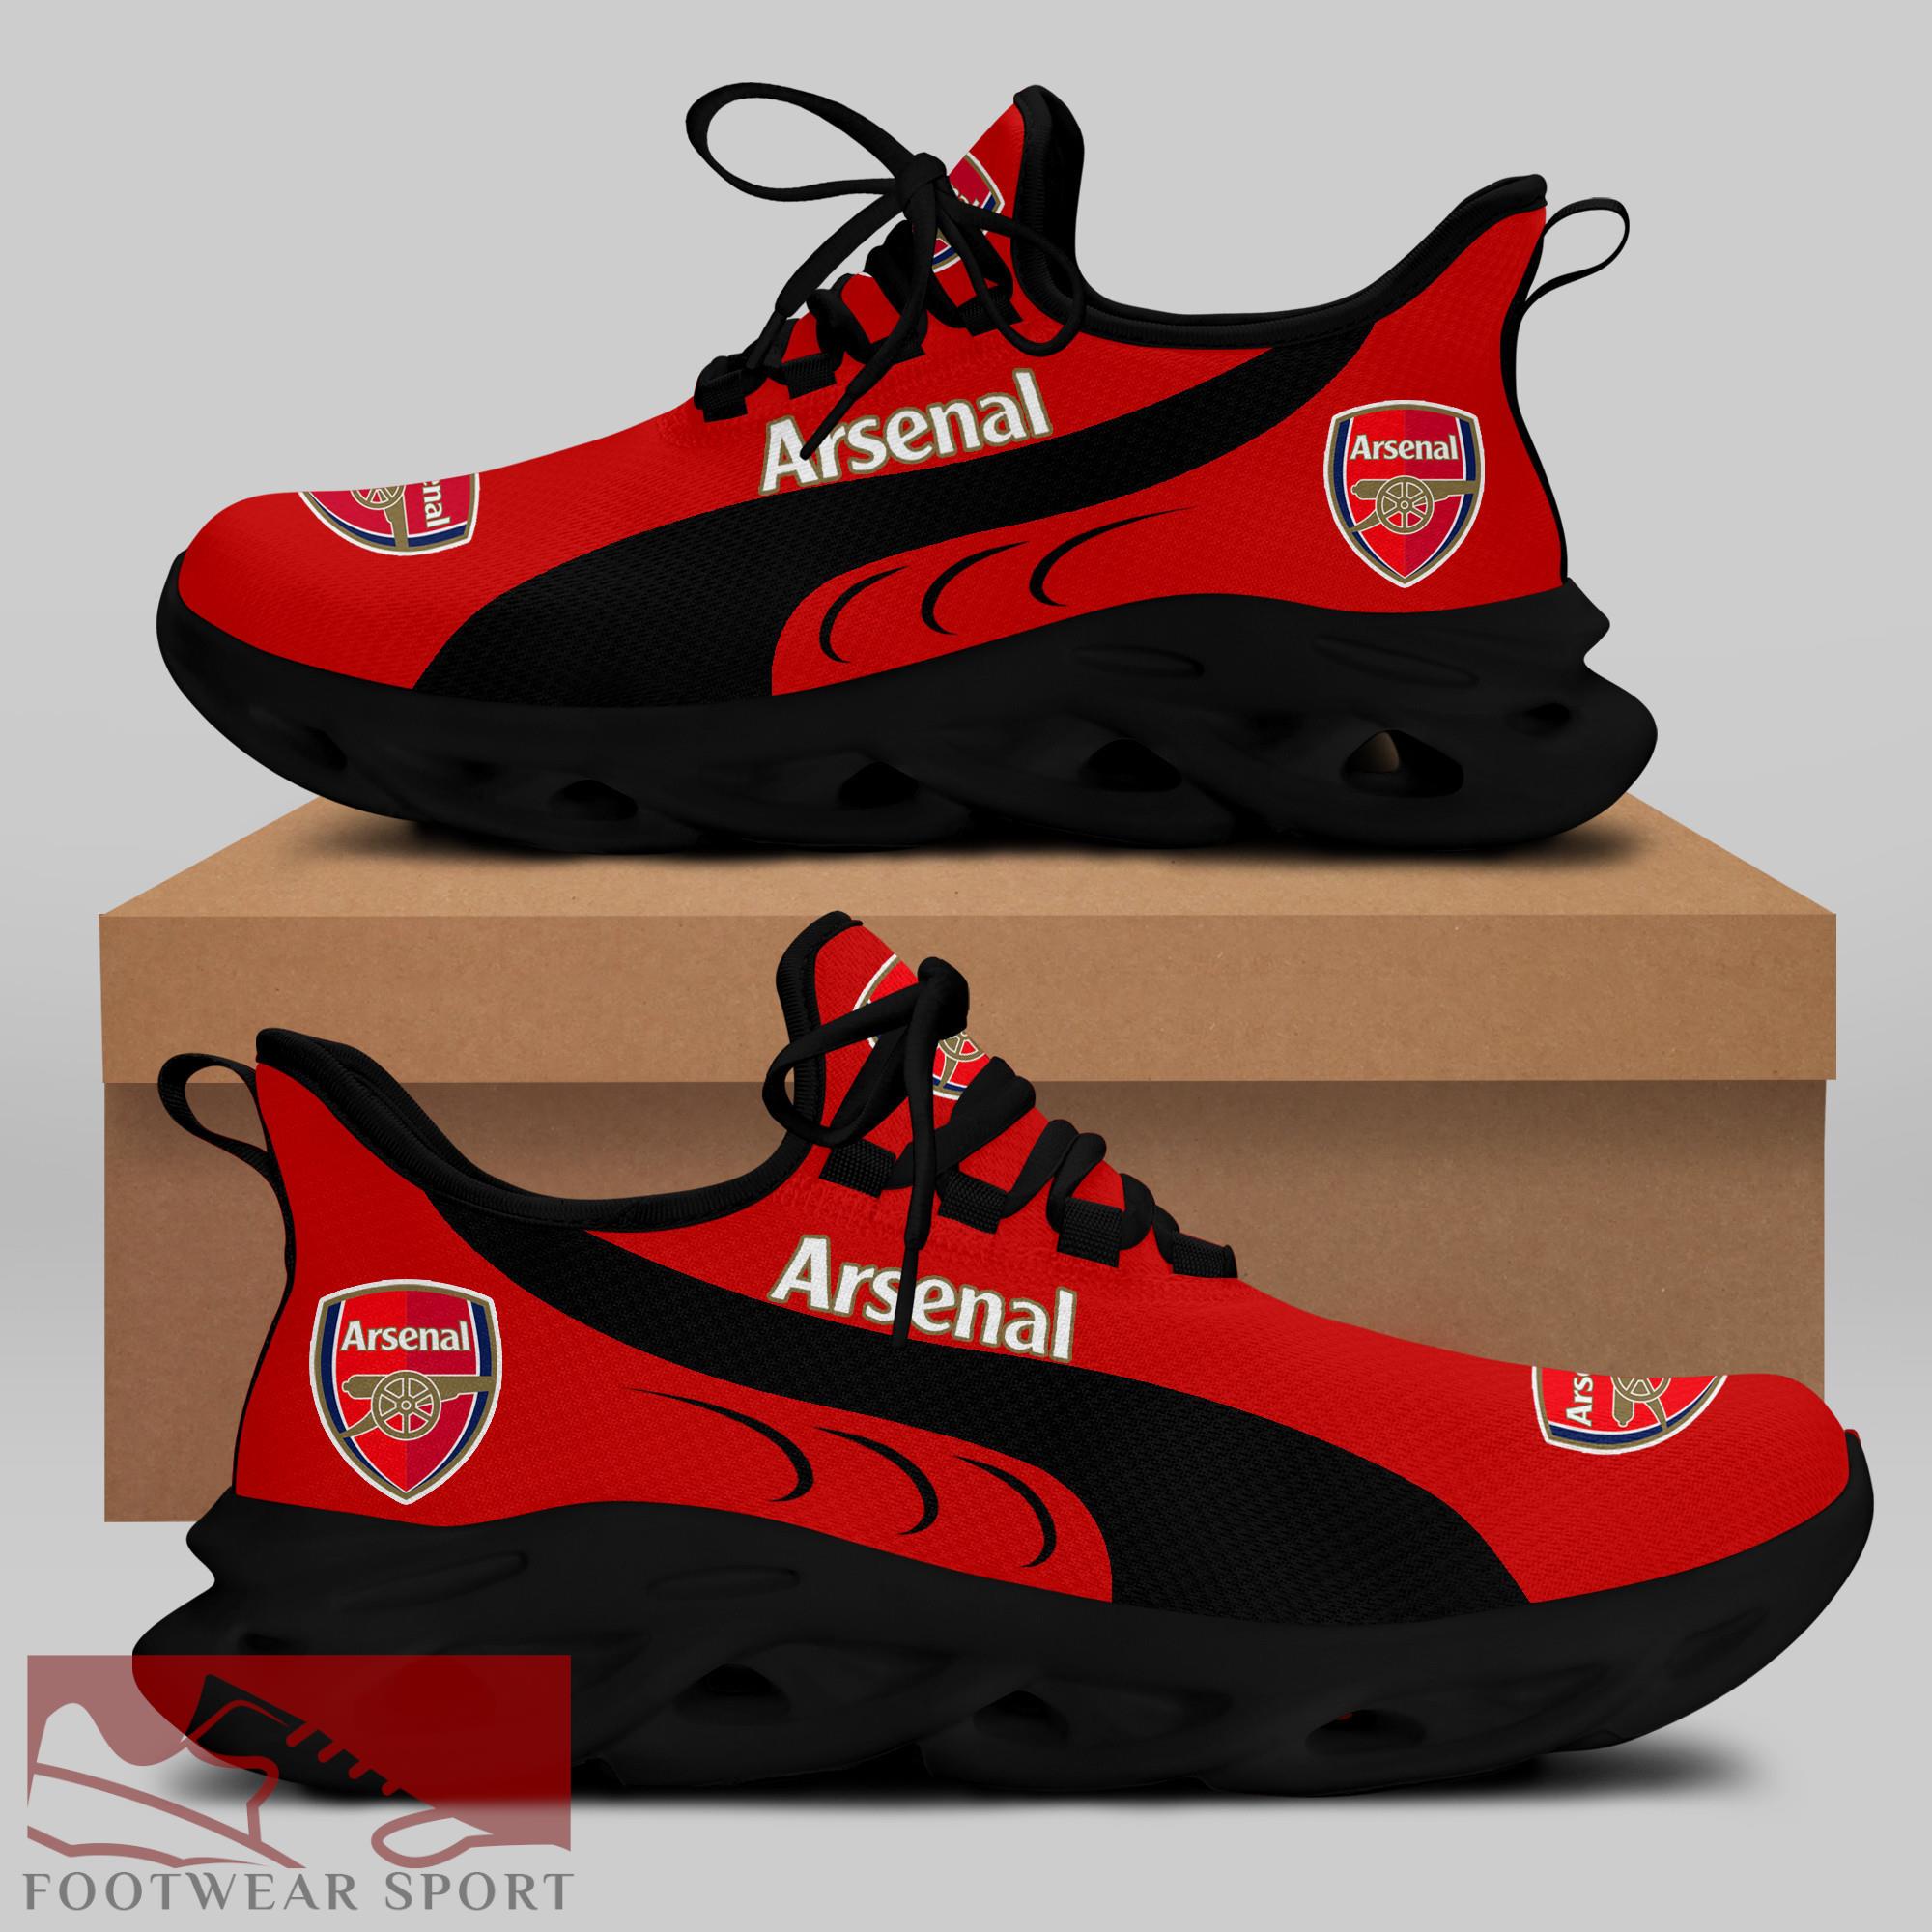 Arsenal Fans EPL Chunky Sneakers Stride Max Soul Shoes For Men And Women - Arsenal Chunky Sneakers White Black Max Soul Shoes For Men And Women Photo 1